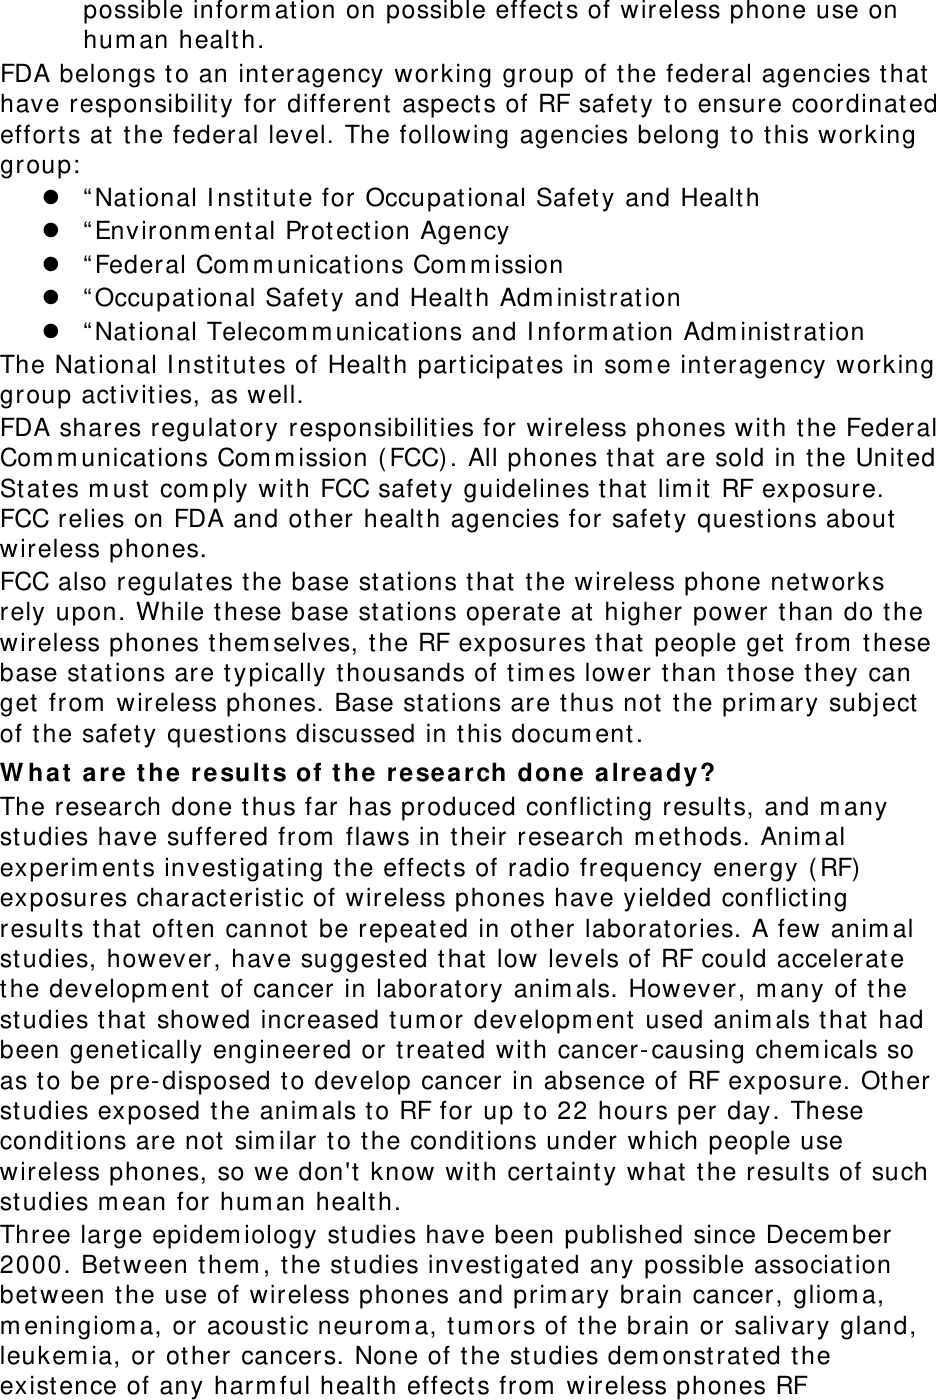 possible information on possible effects of wireless phone use on human health. FDA belongs to an interagency working group of the federal agencies that have responsibility for different aspects of RF safety to ensure coordinated efforts at the federal level. The following agencies belong to this working group: z “National Institute for Occupational Safety and Health z “Environmental Protection Agency z “Federal Communications Commission z “Occupational Safety and Health Administration z “National Telecommunications and Information Administration The National Institutes of Health participates in some interagency working group activities, as well. FDA shares regulatory responsibilities for wireless phones with the Federal Communications Commission (FCC). All phones that are sold in the United States must comply with FCC safety guidelines that limit RF exposure. FCC relies on FDA and other health agencies for safety questions about wireless phones. FCC also regulates the base stations that the wireless phone networks rely upon. While these base stations operate at higher power than do the wireless phones themselves, the RF exposures that people get from these base stations are typically thousands of times lower than those they can get from wireless phones. Base stations are thus not the primary subject of the safety questions discussed in this document. What are the results of the research done already? The research done thus far has produced conflicting results, and many studies have suffered from flaws in their research methods. Animal experiments investigating the effects of radio frequency energy (RF) exposures characteristic of wireless phones have yielded conflicting results that often cannot be repeated in other laboratories. A few animal studies, however, have suggested that low levels of RF could accelerate the development of cancer in laboratory animals. However, many of the studies that showed increased tumor development used animals that had been genetically engineered or treated with cancer-causing chemicals so as to be pre-disposed to develop cancer in absence of RF exposure. Other studies exposed the animals to RF for up to 22 hours per day. These conditions are not similar to the conditions under which people use wireless phones, so we don&apos;t know with certainty what the results of such studies mean for human health. Three large epidemiology studies have been published since December 2000. Between them, the studies investigated any possible association between the use of wireless phones and primary brain cancer, glioma, meningioma, or acoustic neuroma, tumors of the brain or salivary gland, leukemia, or other cancers. None of the studies demonstrated the existence of any harmful health effects from wireless phones RF 